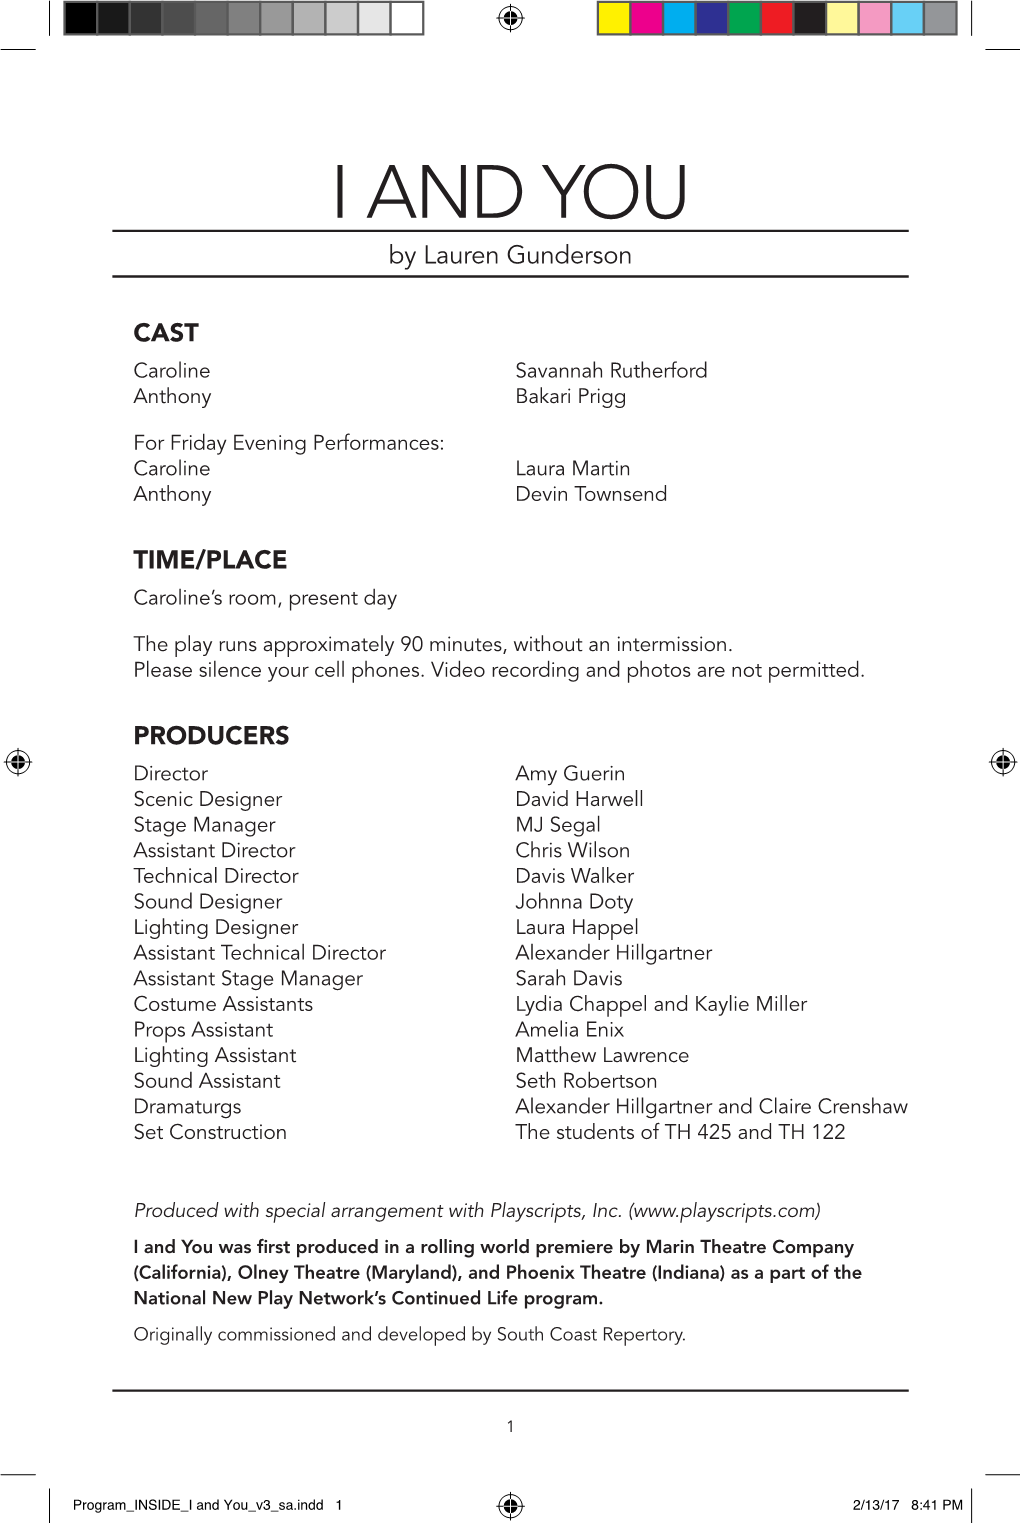 "I and You" Theatre Program